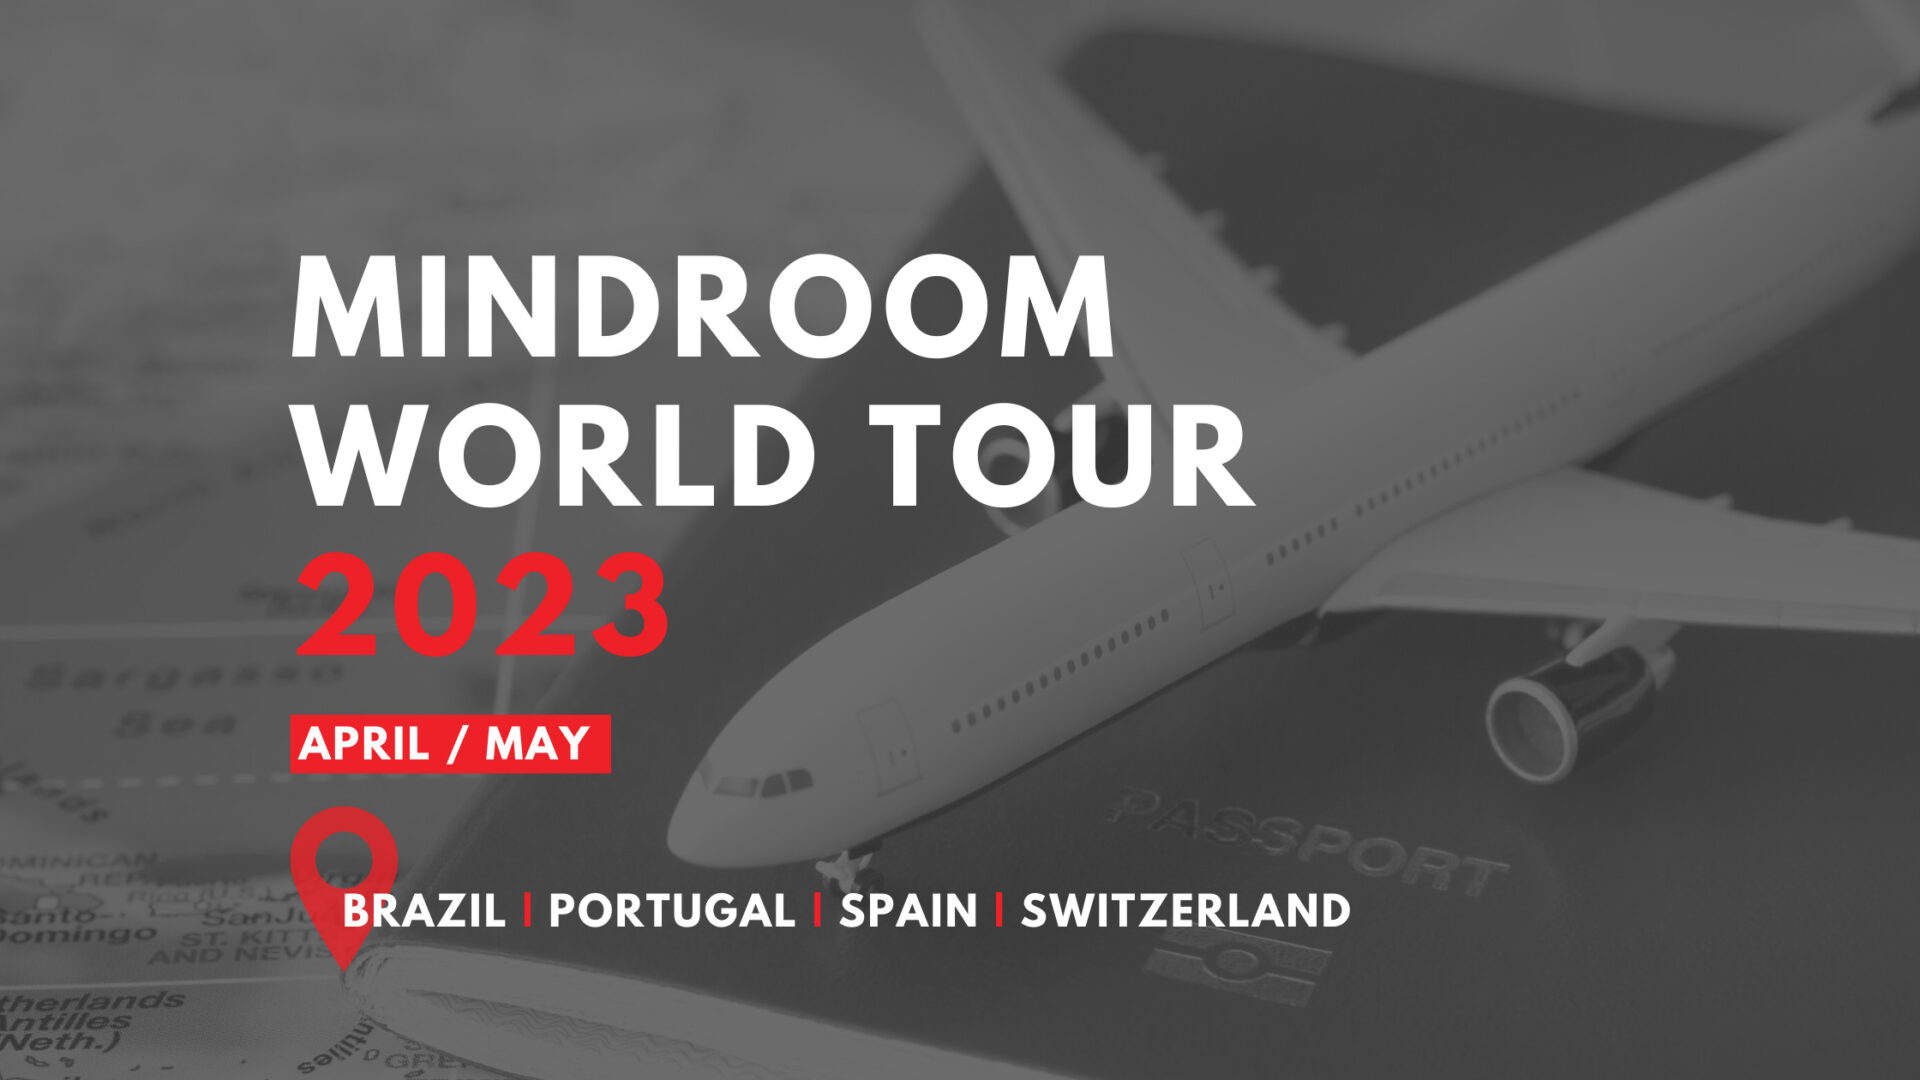 Mindroom World Tour 2023: Your Gateway to Living, Studying, and Working in Australia